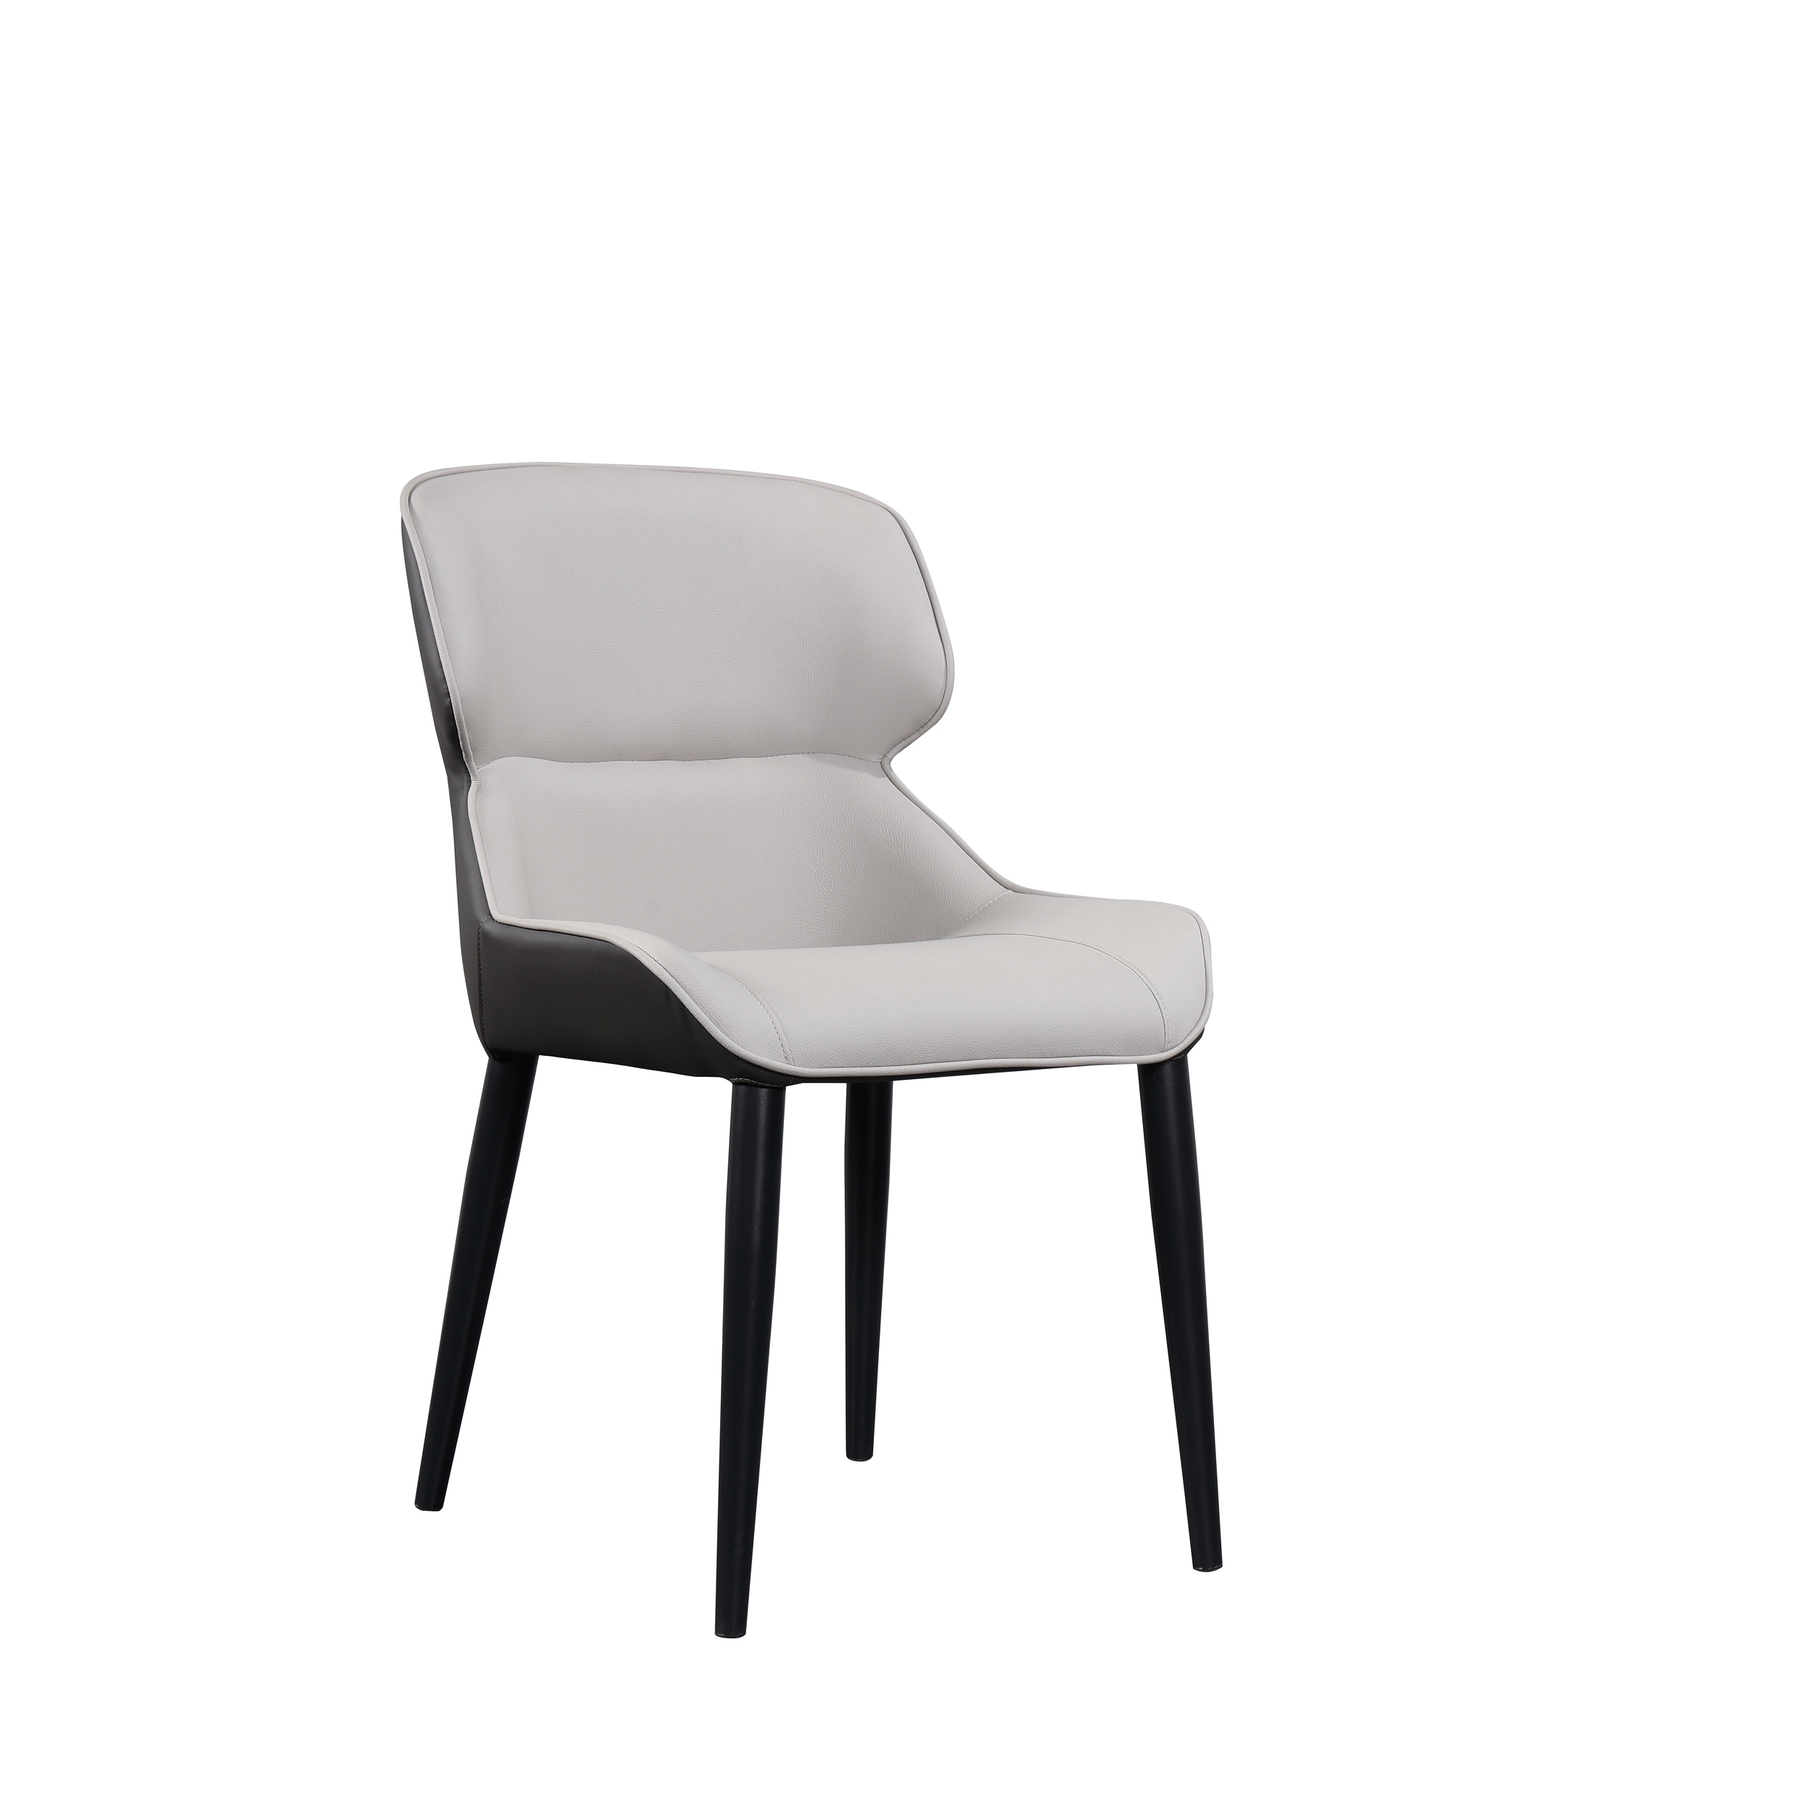 FS-D950 Dining Chair